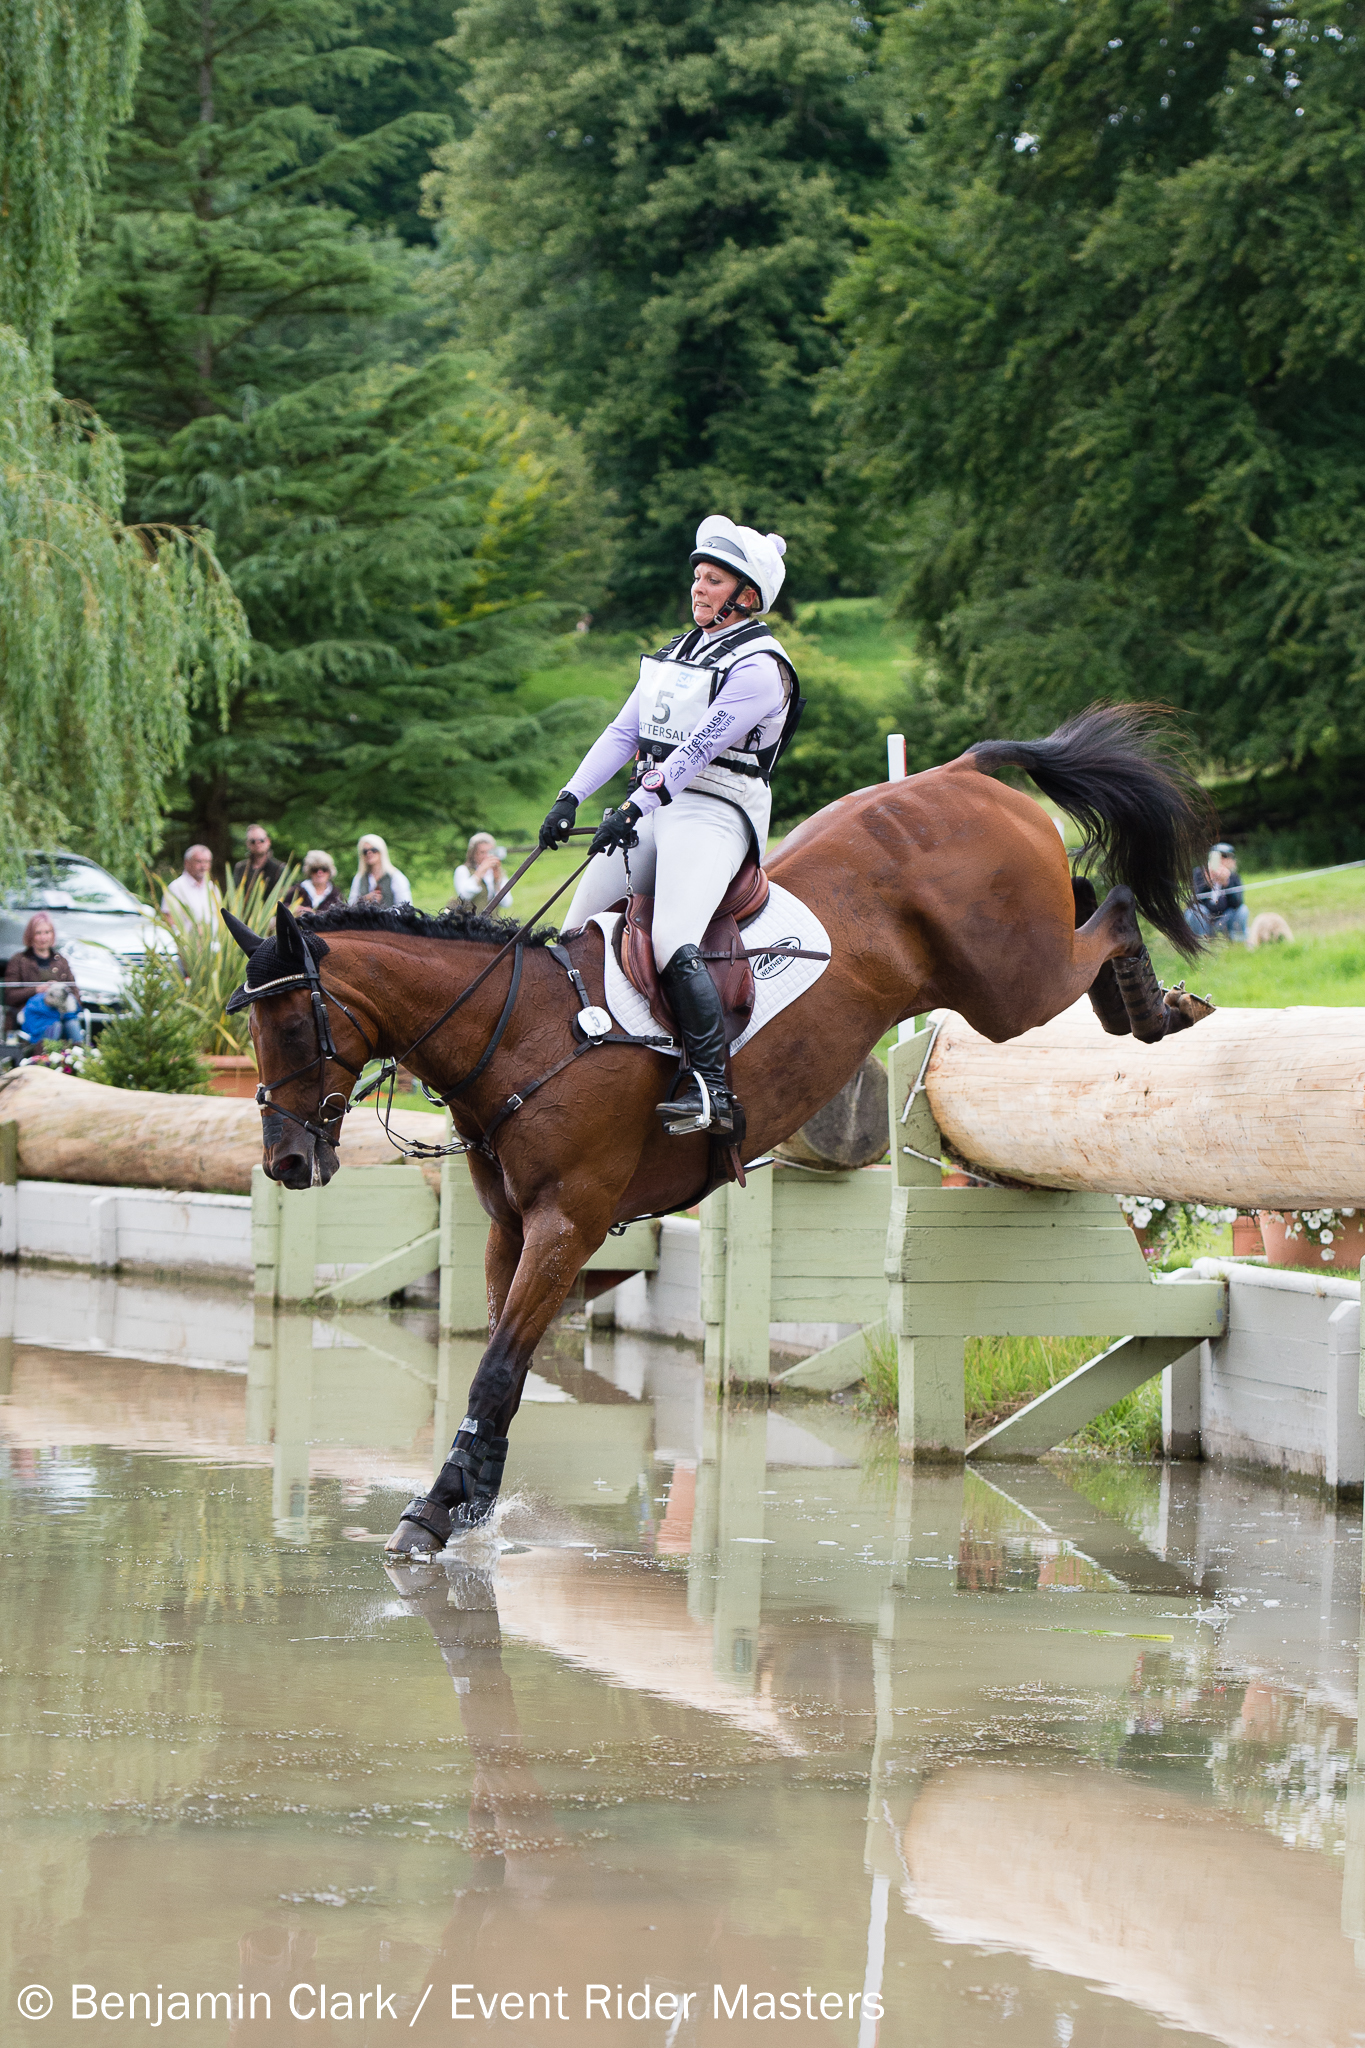 Gemma Tattersall and Arctic Soul. Photo credit: Event Rider Masters